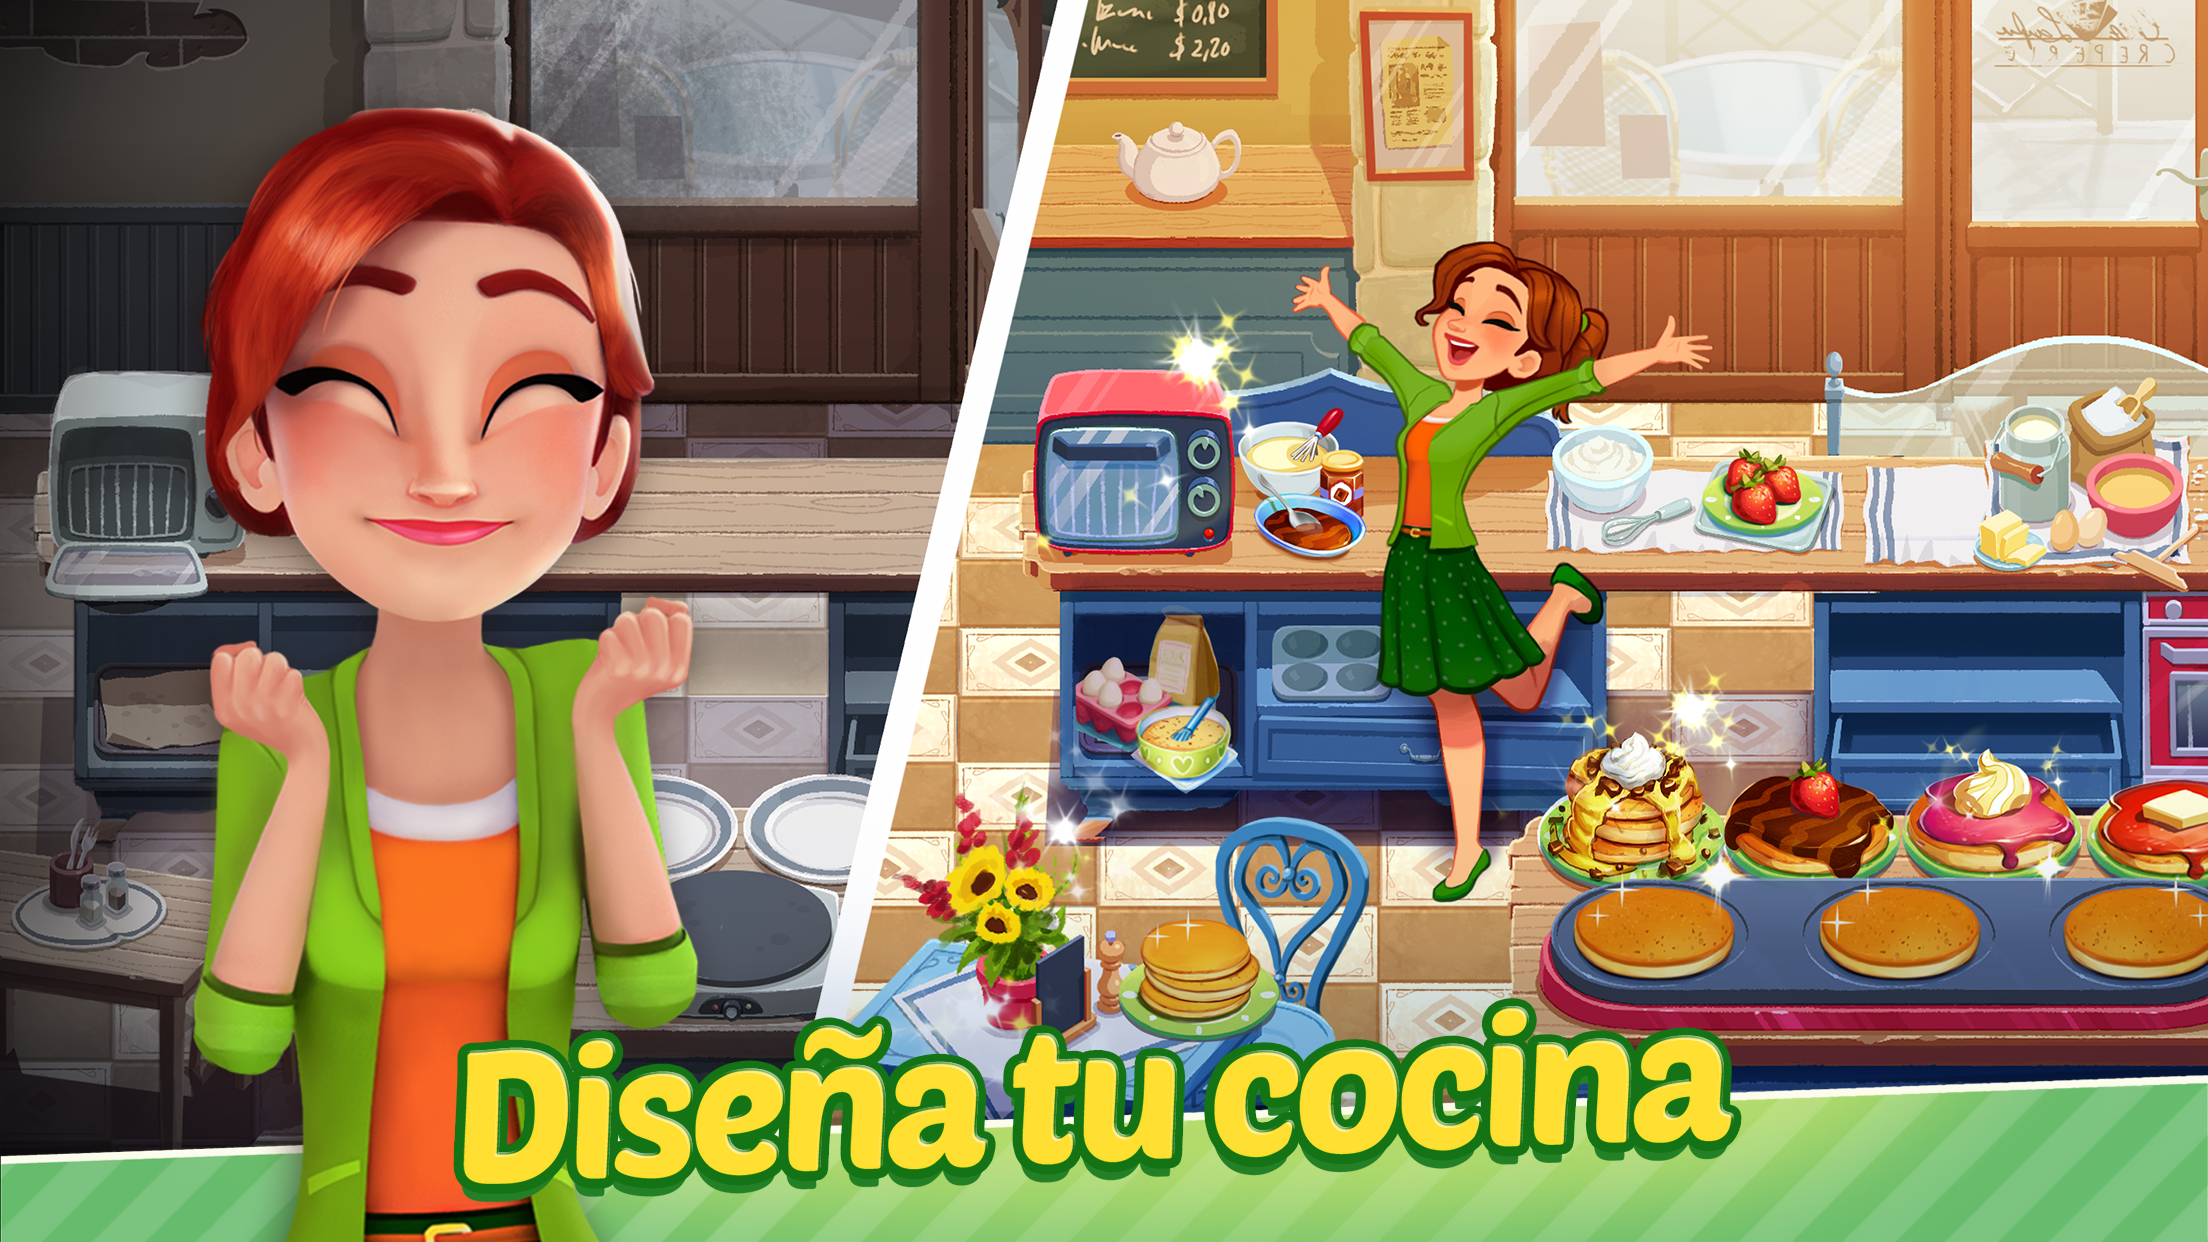 Screenshot 1 of Delicious World - Cooking Game 1.84.0